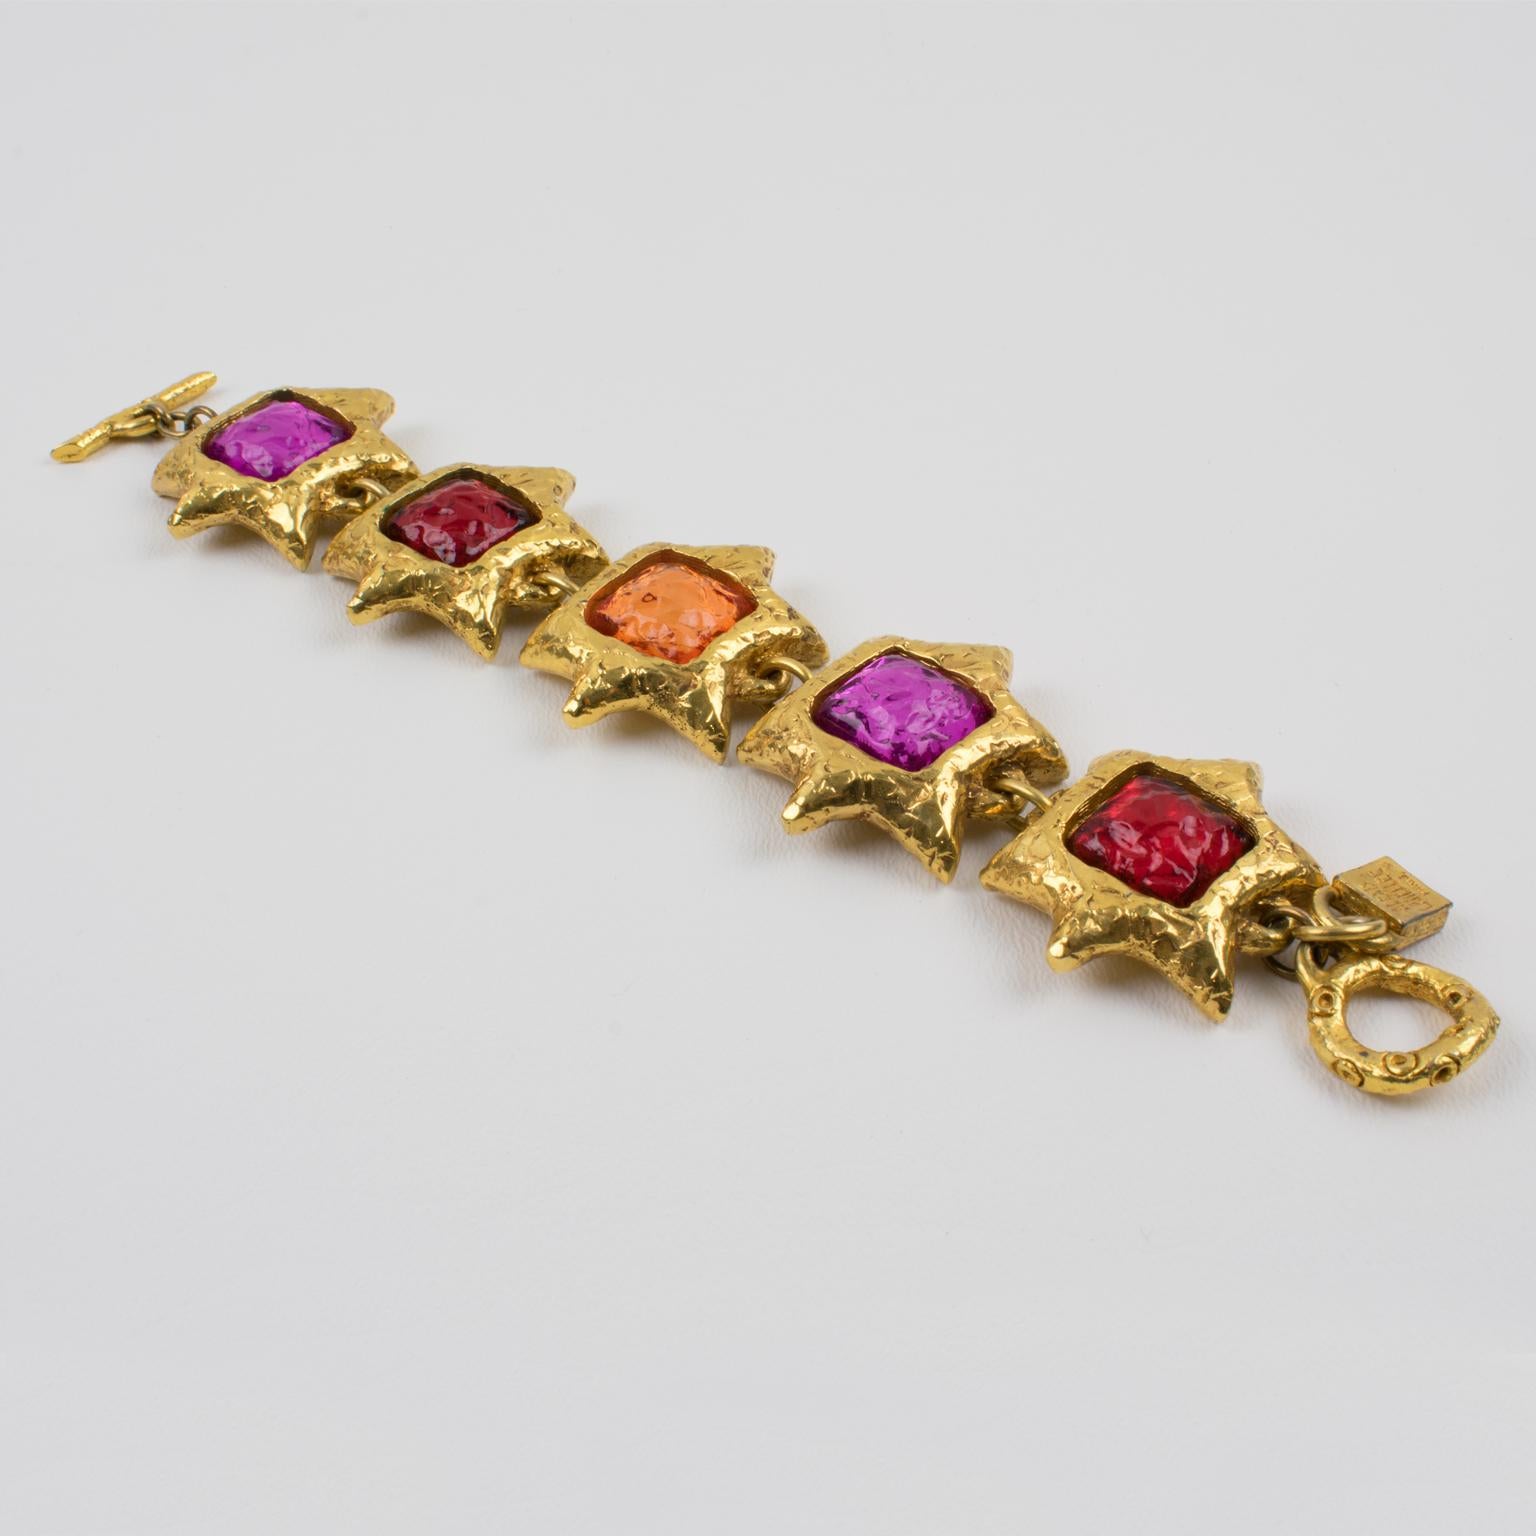 Charming Alexis Lahellec Paris signed link-bracelet. A couture piece from that famous French Jewelry designer, featuring five star-shaped gilt metal-coated resin elements topped with colorful resin cabochons. Assorted tones of ruby red, apricot